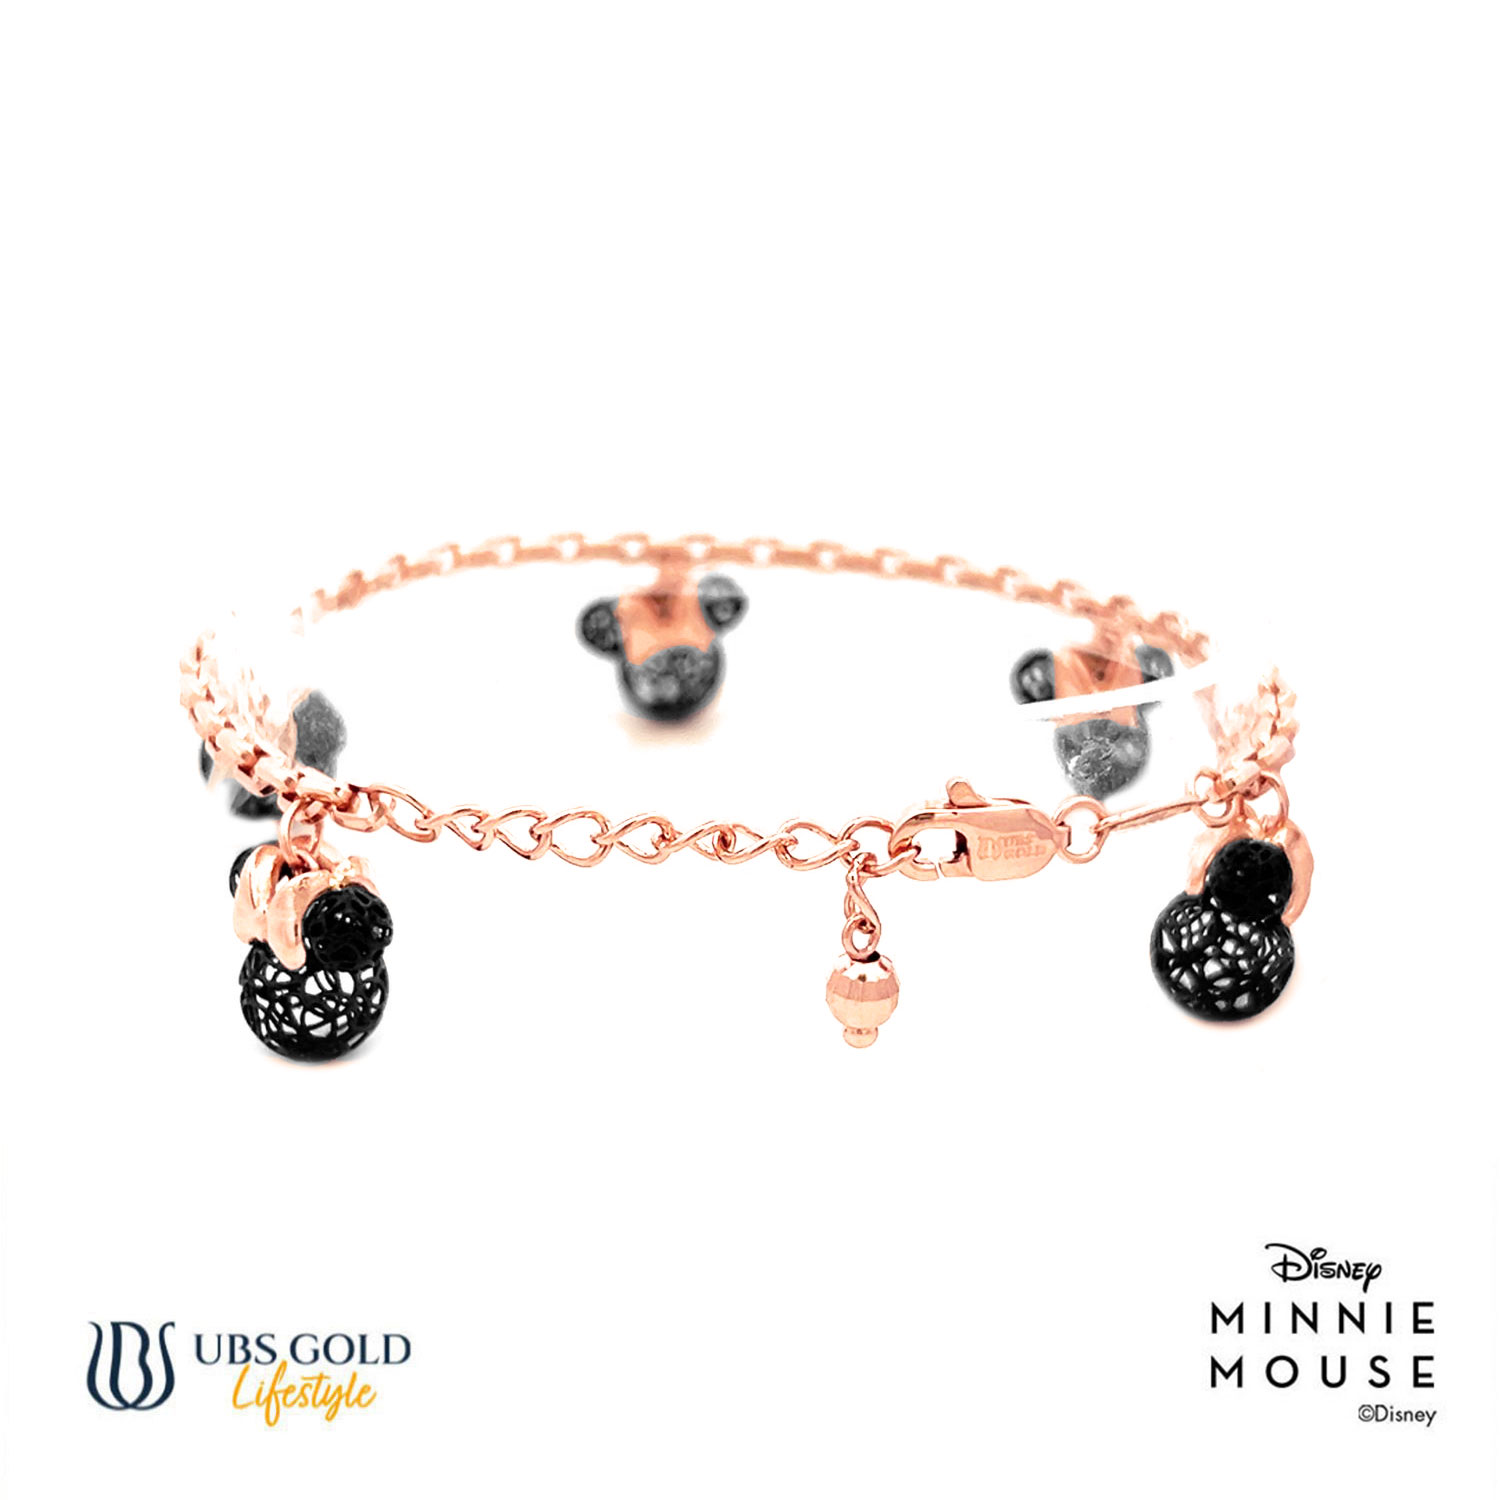 UBS Gold Gelang Emas Disney Minnie Mouse - Hgy0148B - 17K